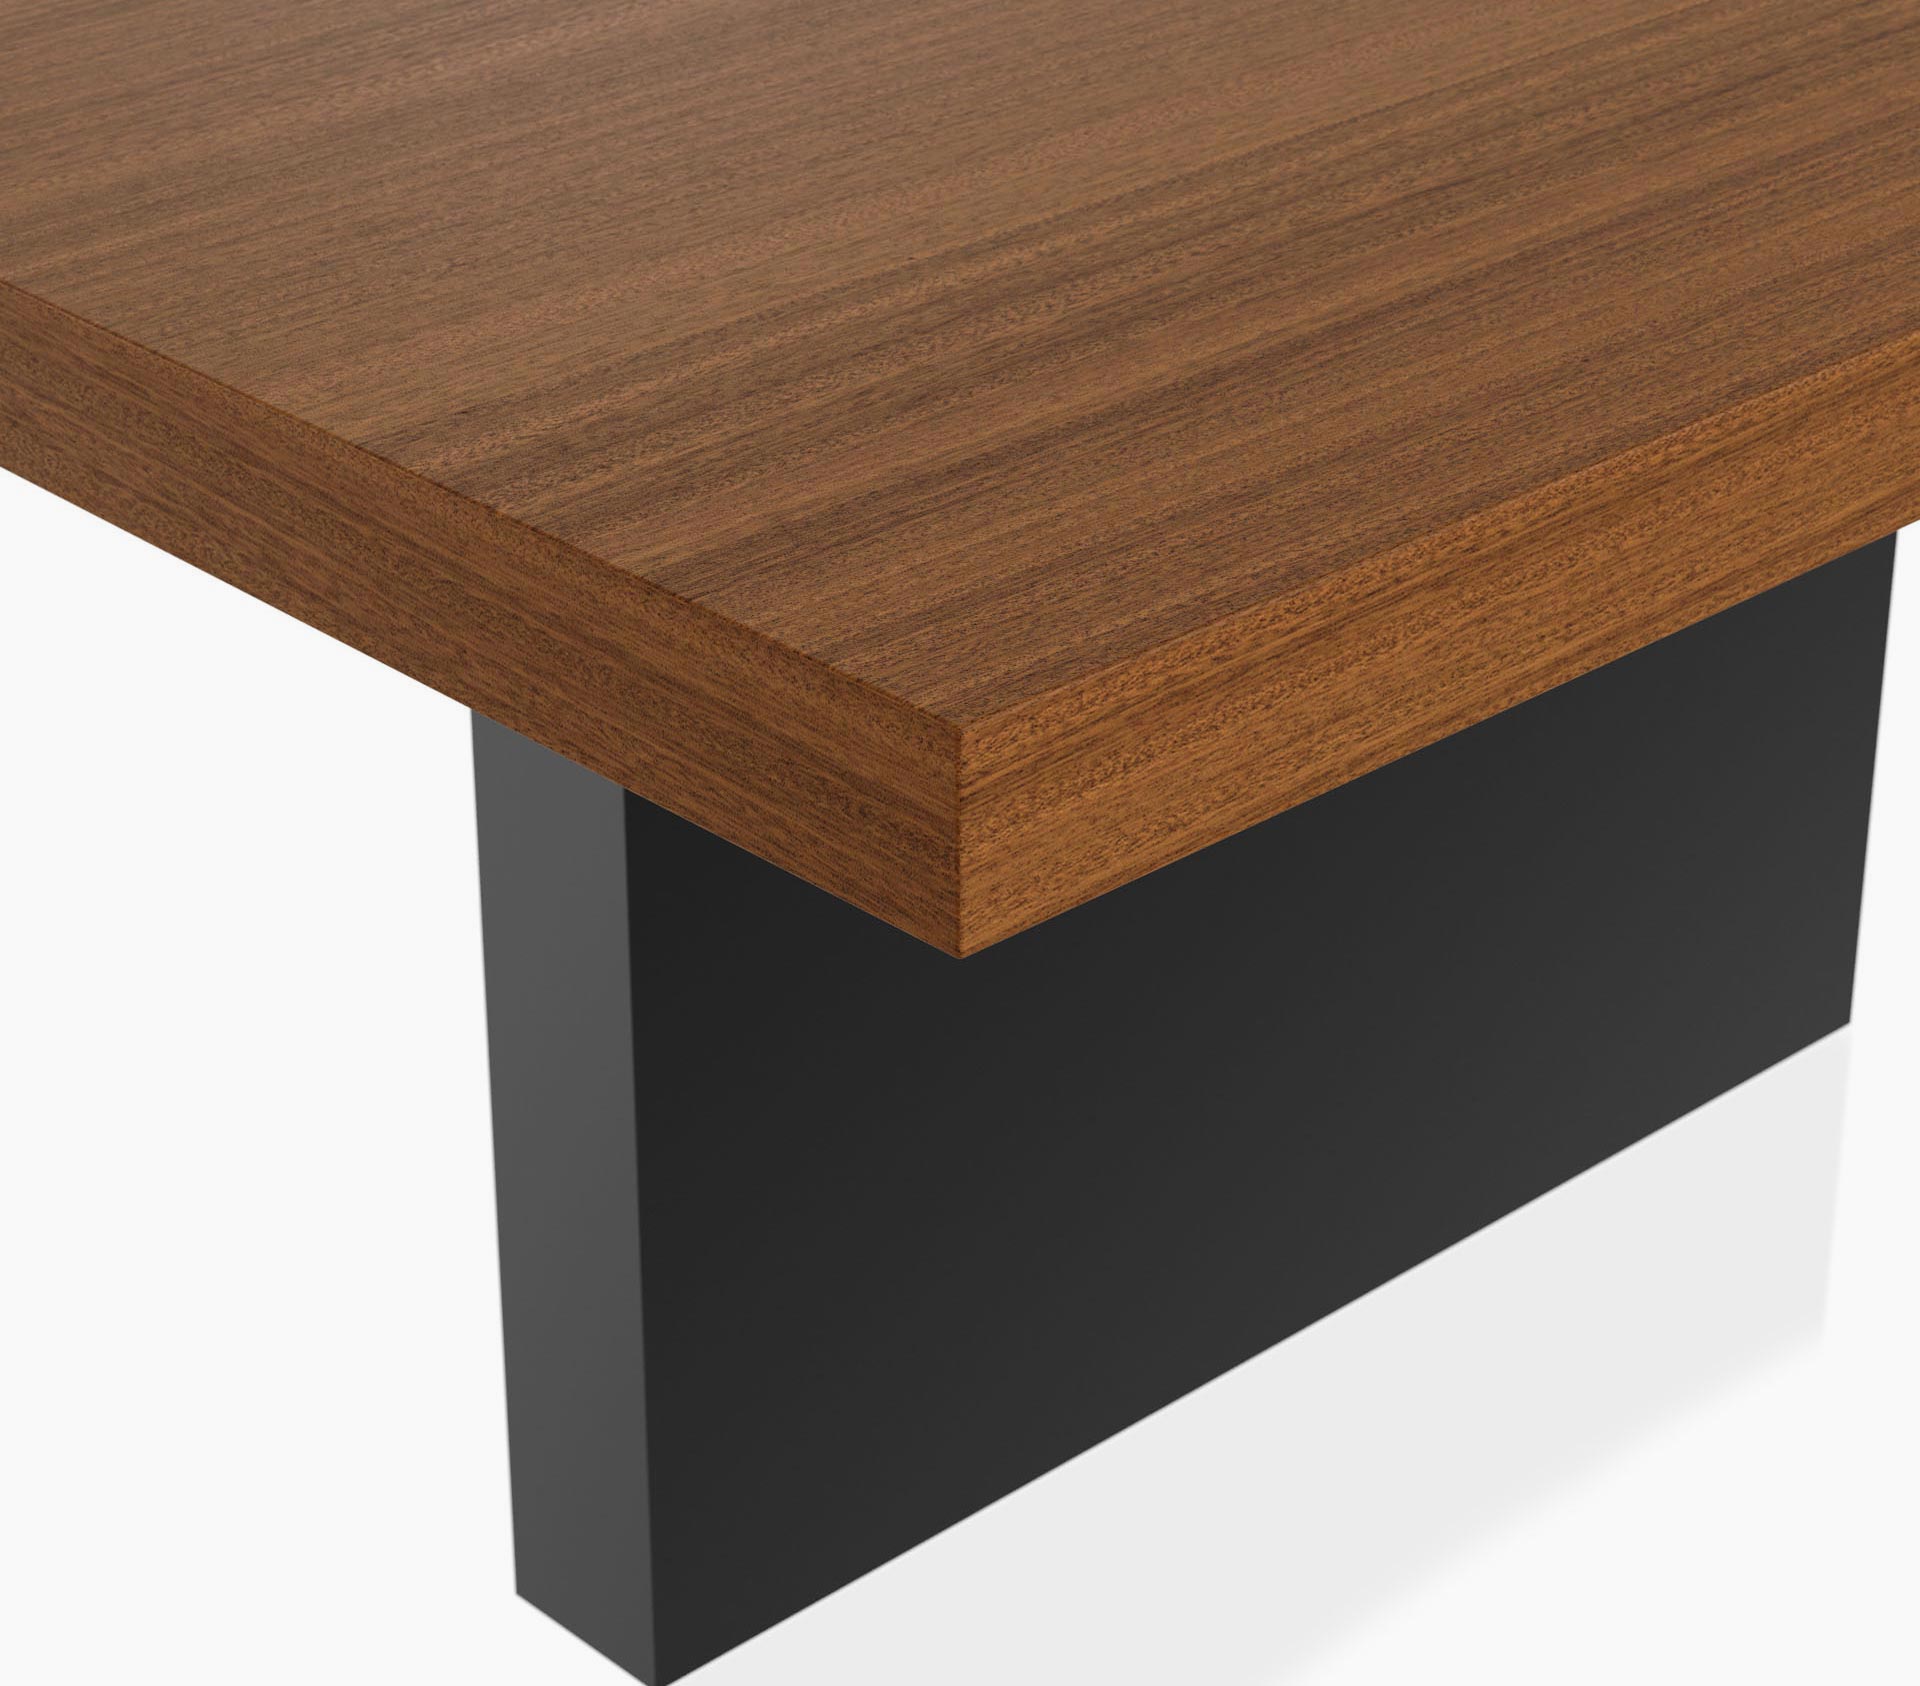 Edge detail on a rectangular JD Conference Table with a natural quarter cut walnut tabletop and a black base